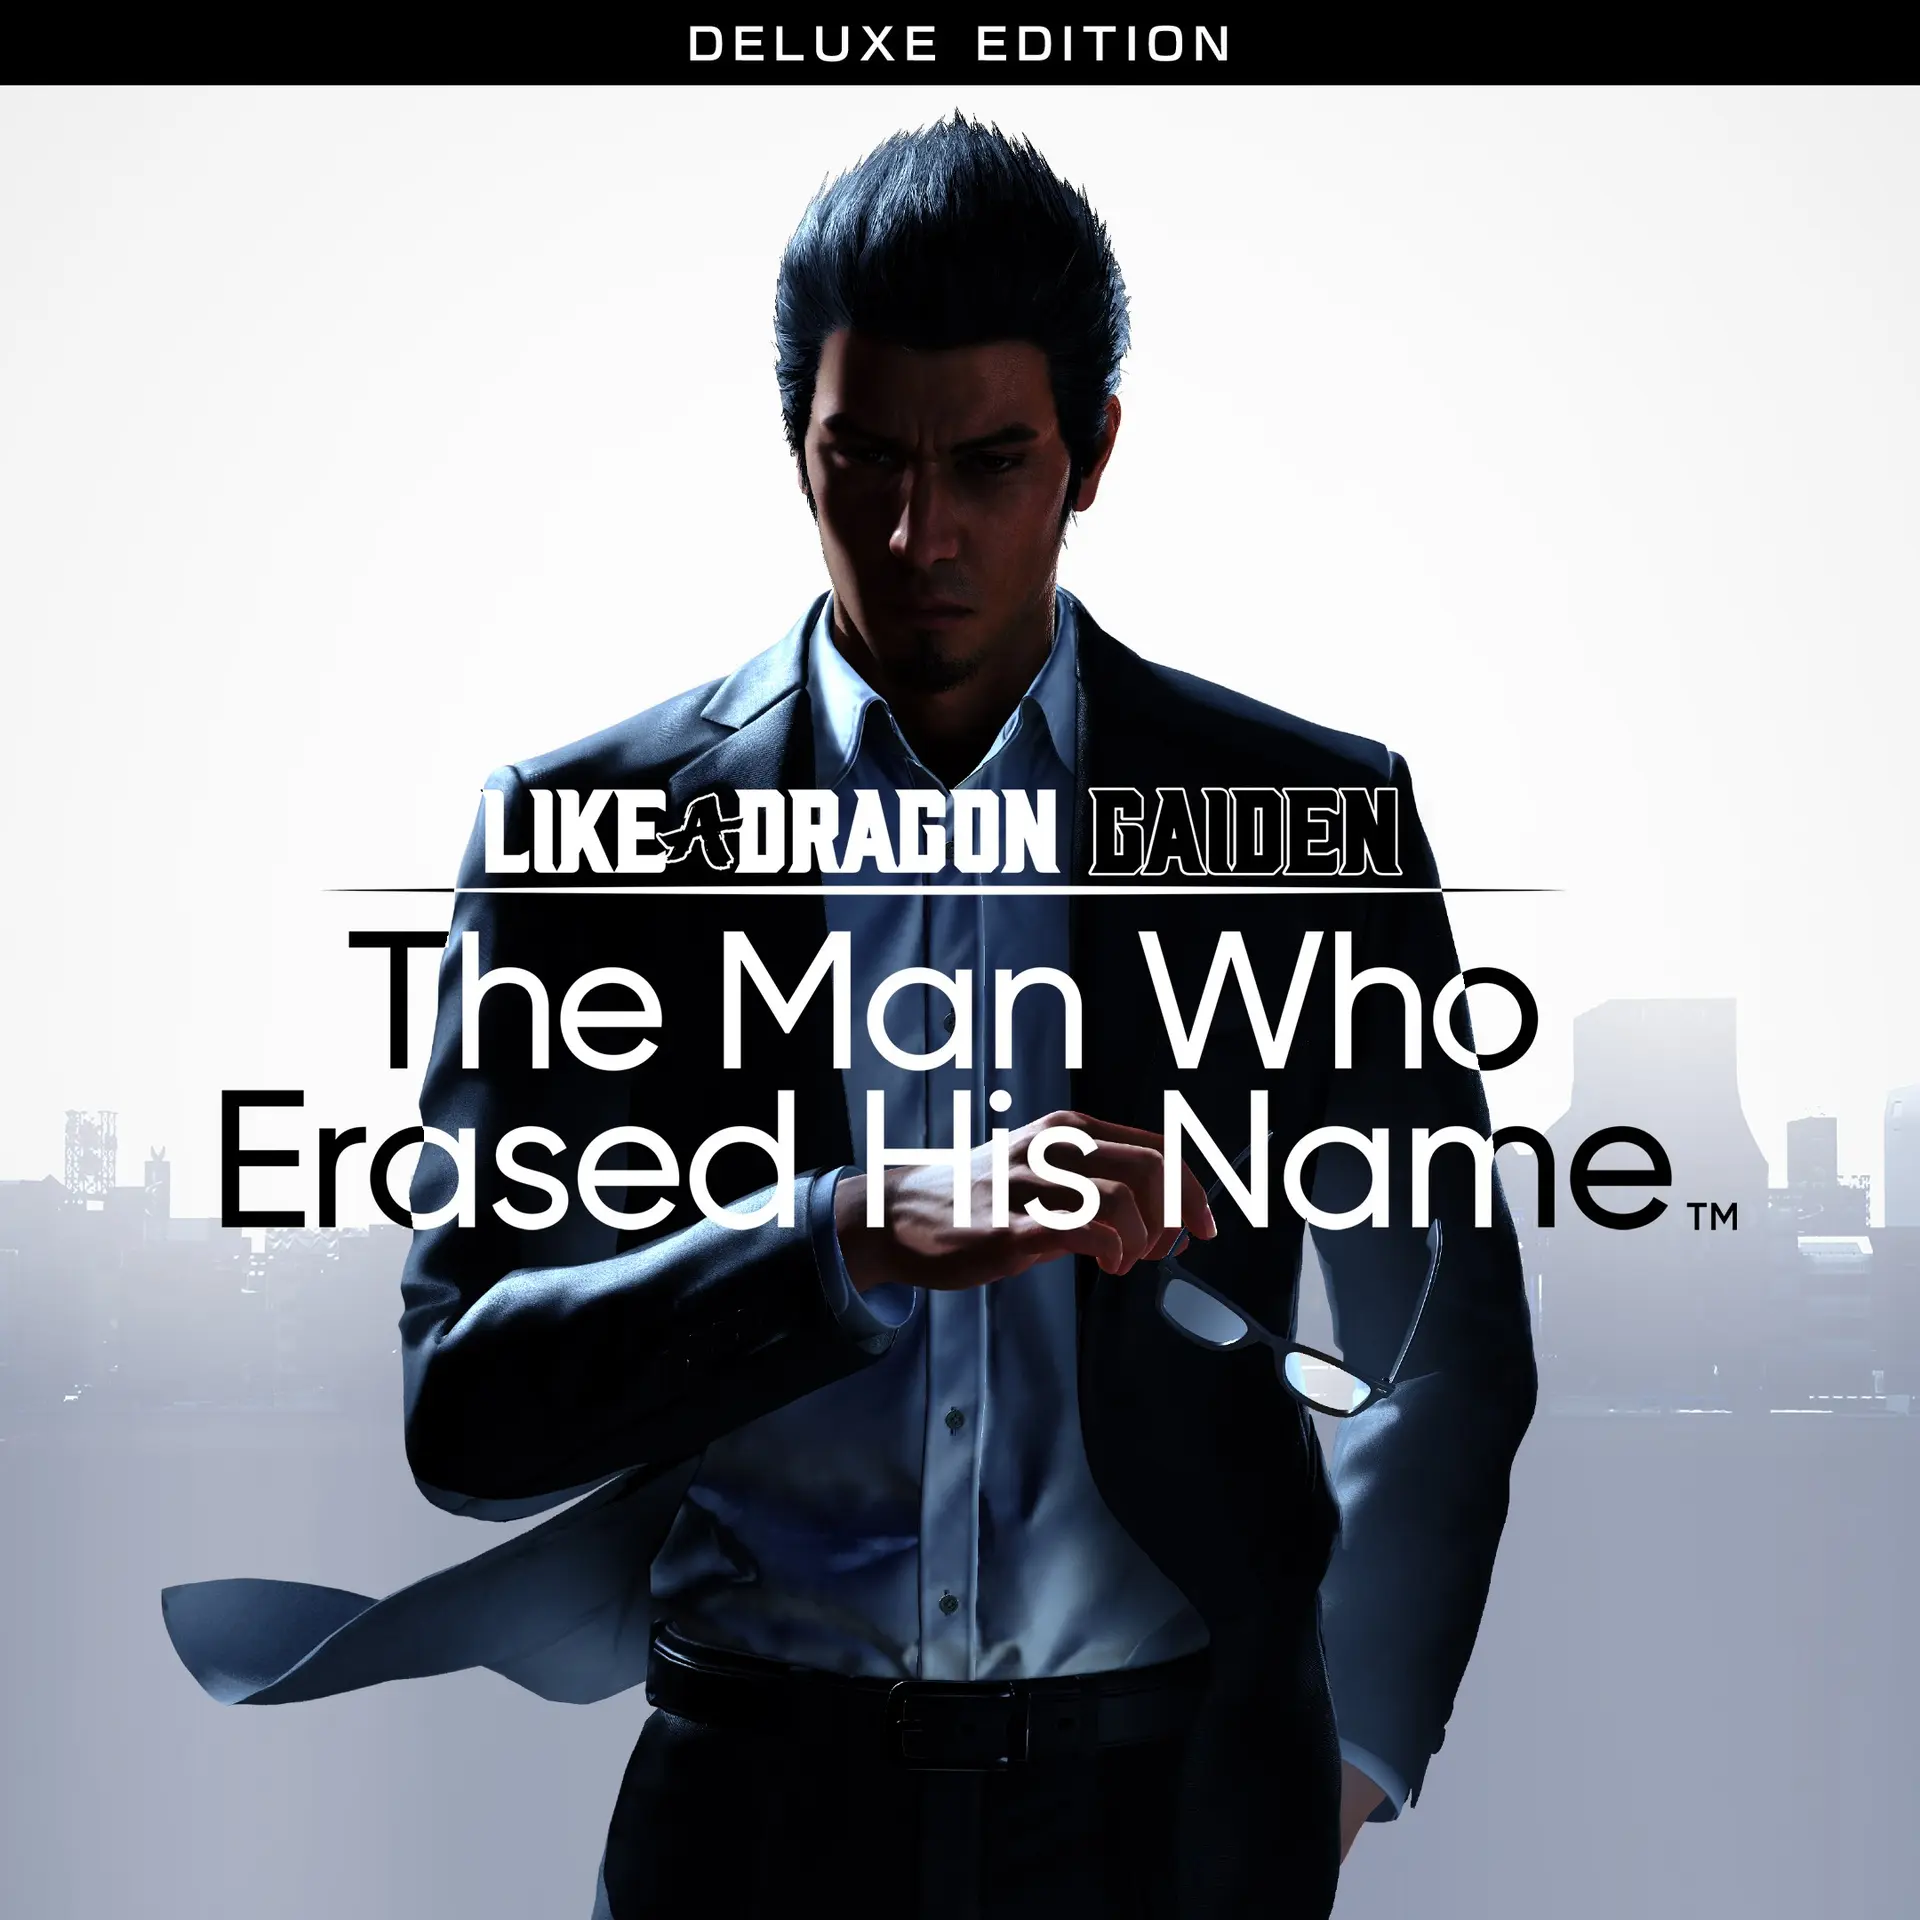 Like a Dragon Gaiden: The Man Who Erased His Name Deluxe Edition (Xbox Games US)